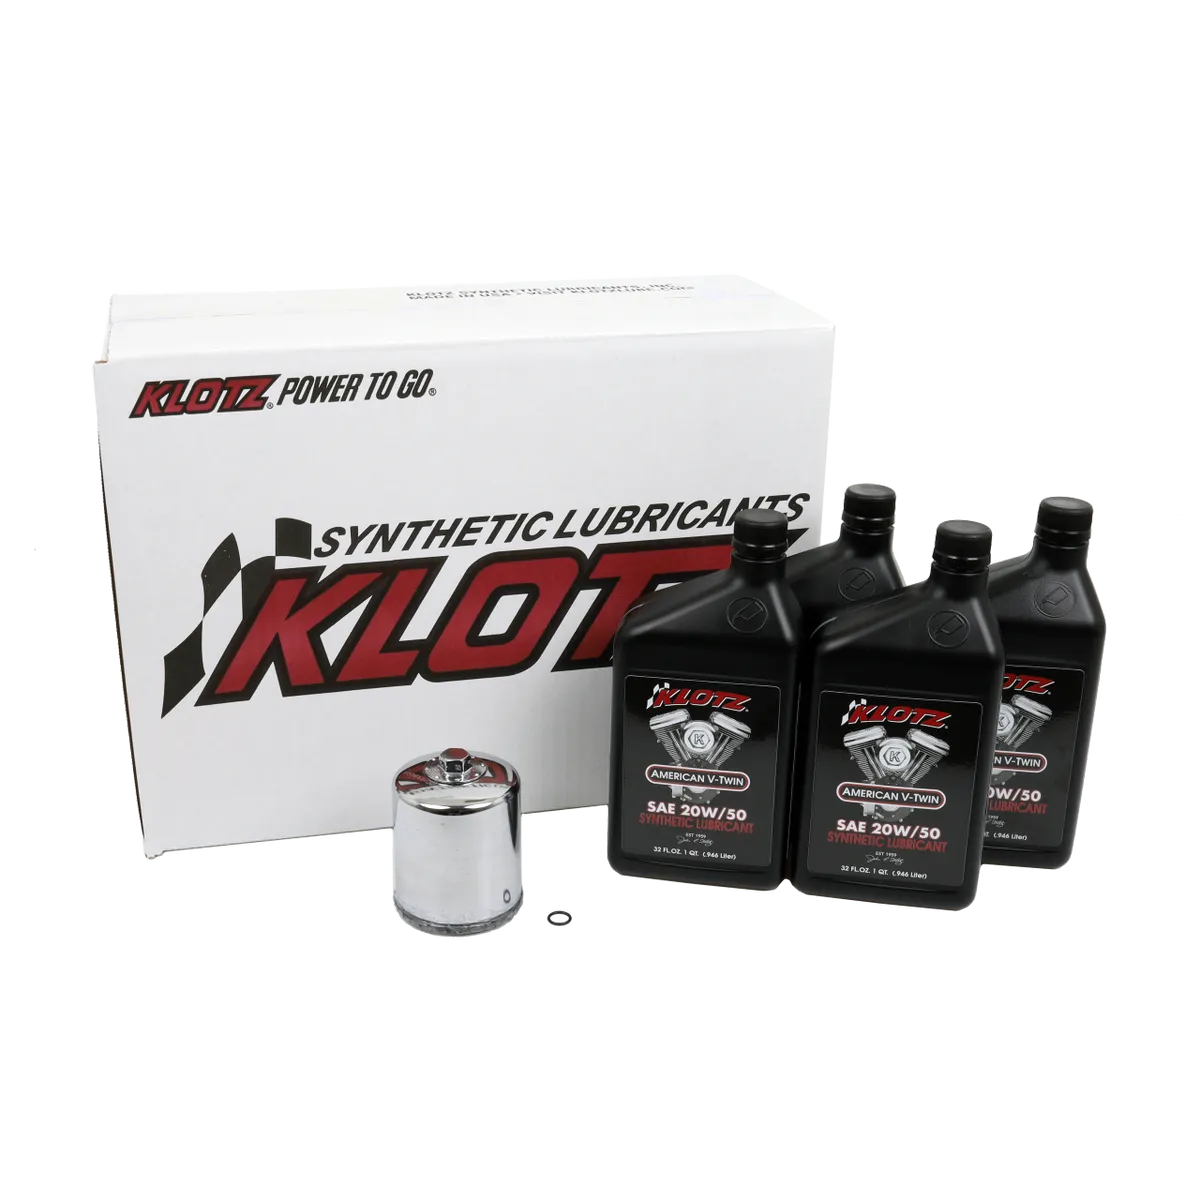 Premium Klotz oil change kit for Harley-Davidson Big Twin motorcycles (Twin Cam and Milwaukee-Eight), including Klotz synthetic lubricants and filter.